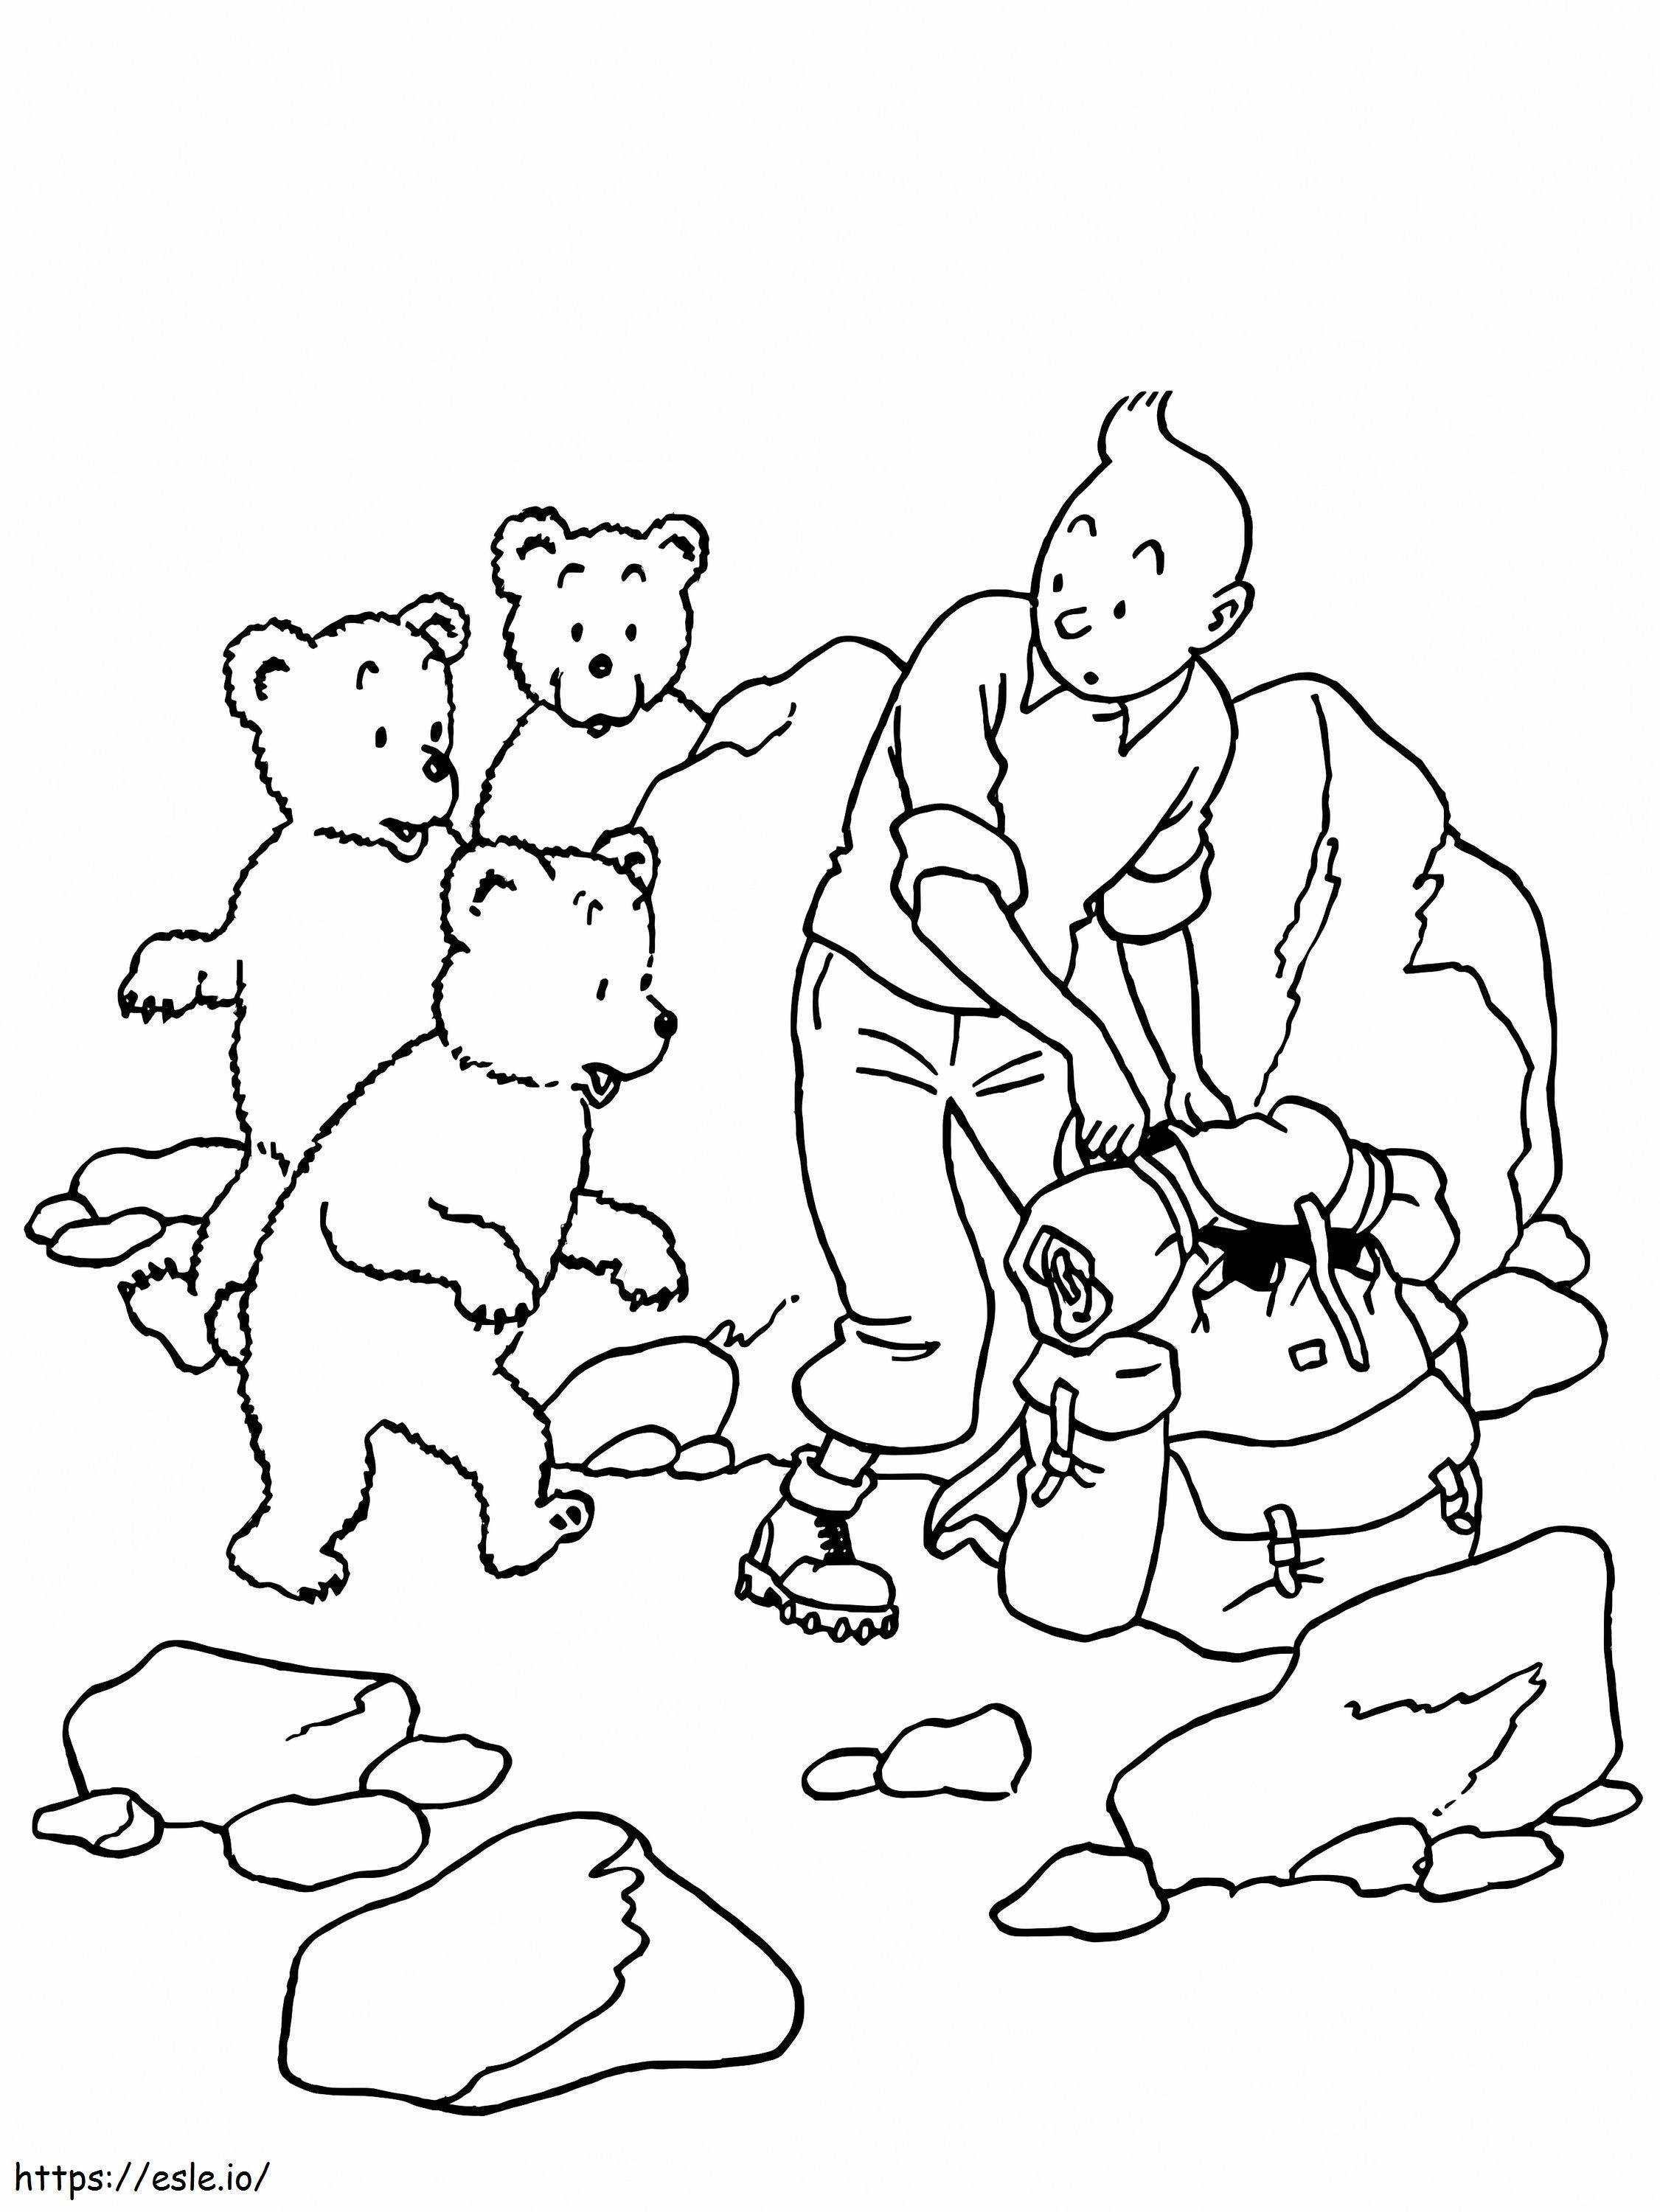 Tintin And Bears coloring page